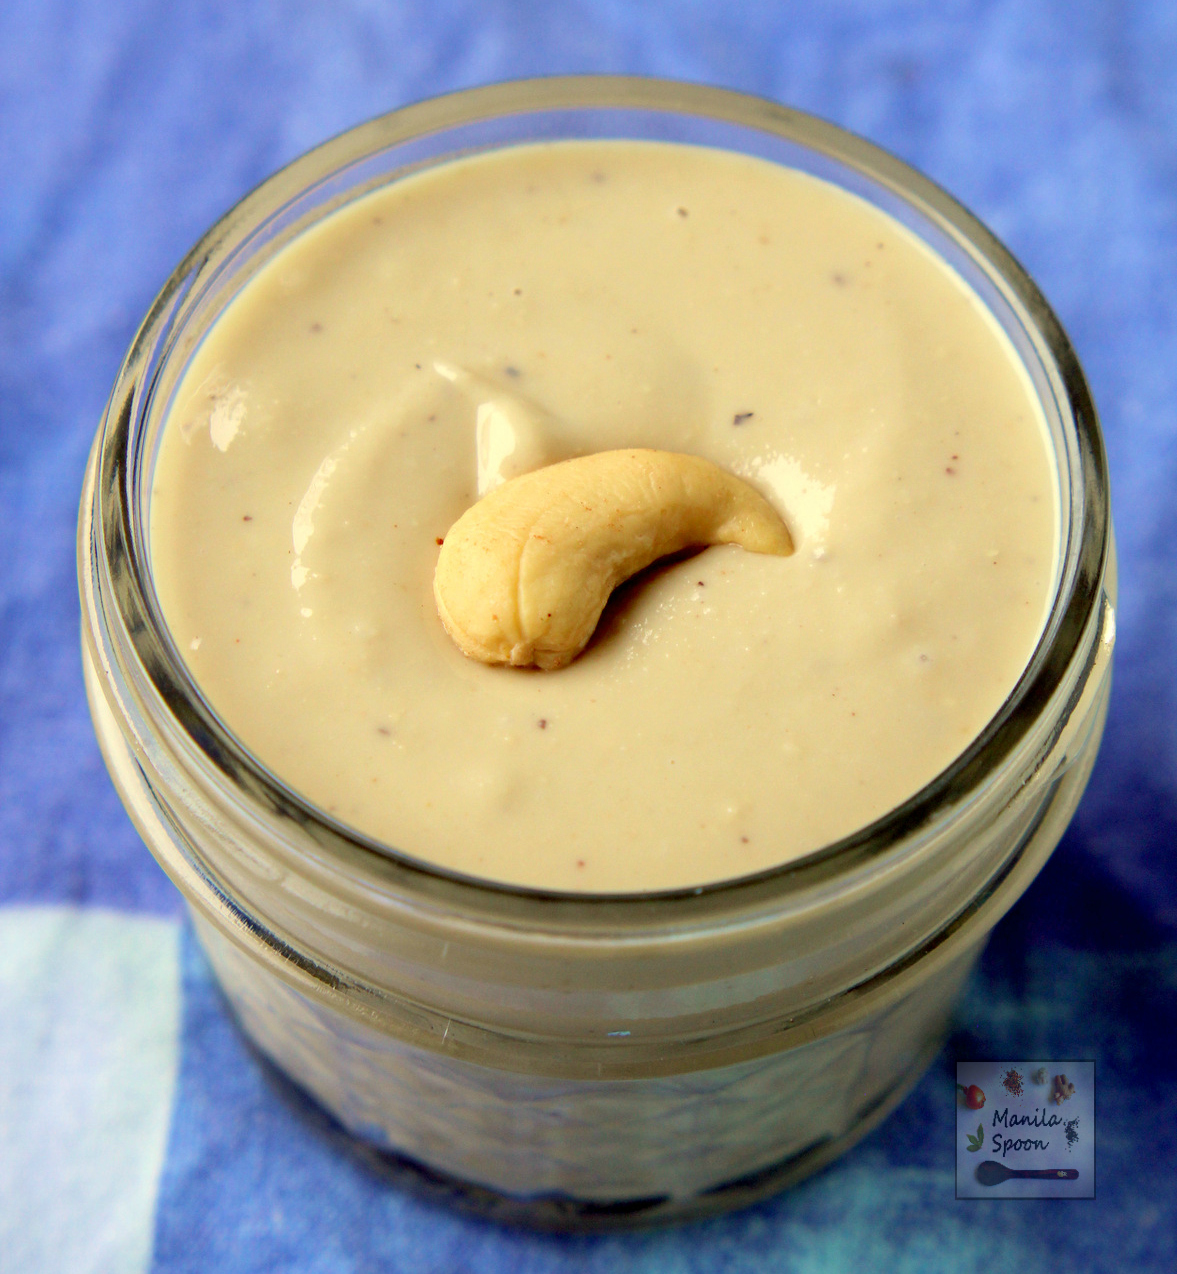 Just 2 ingredients to make your own all-natural, very tasty and super creamy Cashew Butter. Gluten-free, vegan, low-carb, paleo-friendly and so easy to make! | manilaspoon.com